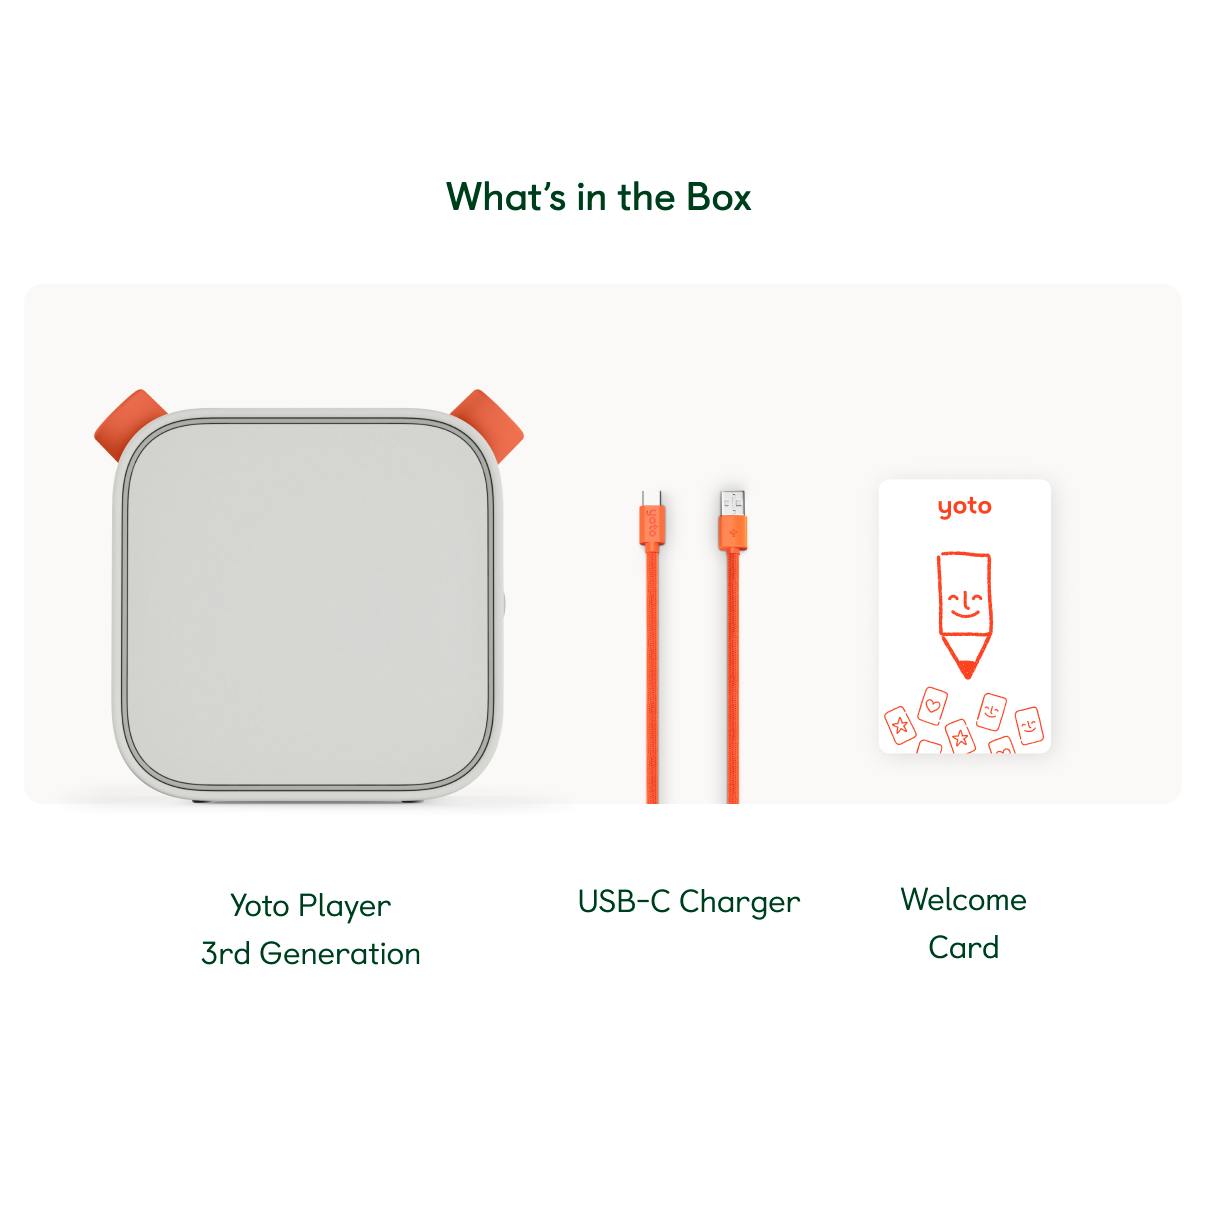 What's in the v3 box - Yoto Player, USB- charger and Welcome Card